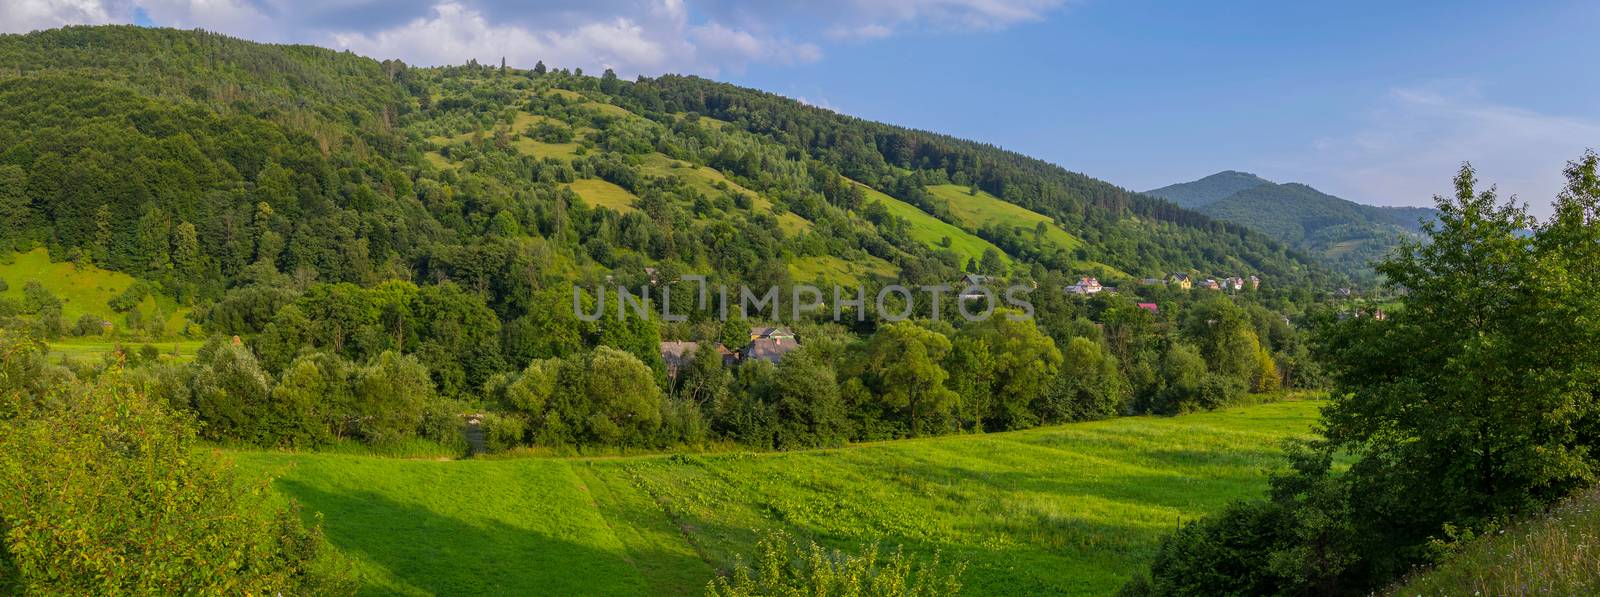 Small rural houses in the shade of green tall trees on the slopes of gently sloping mountains